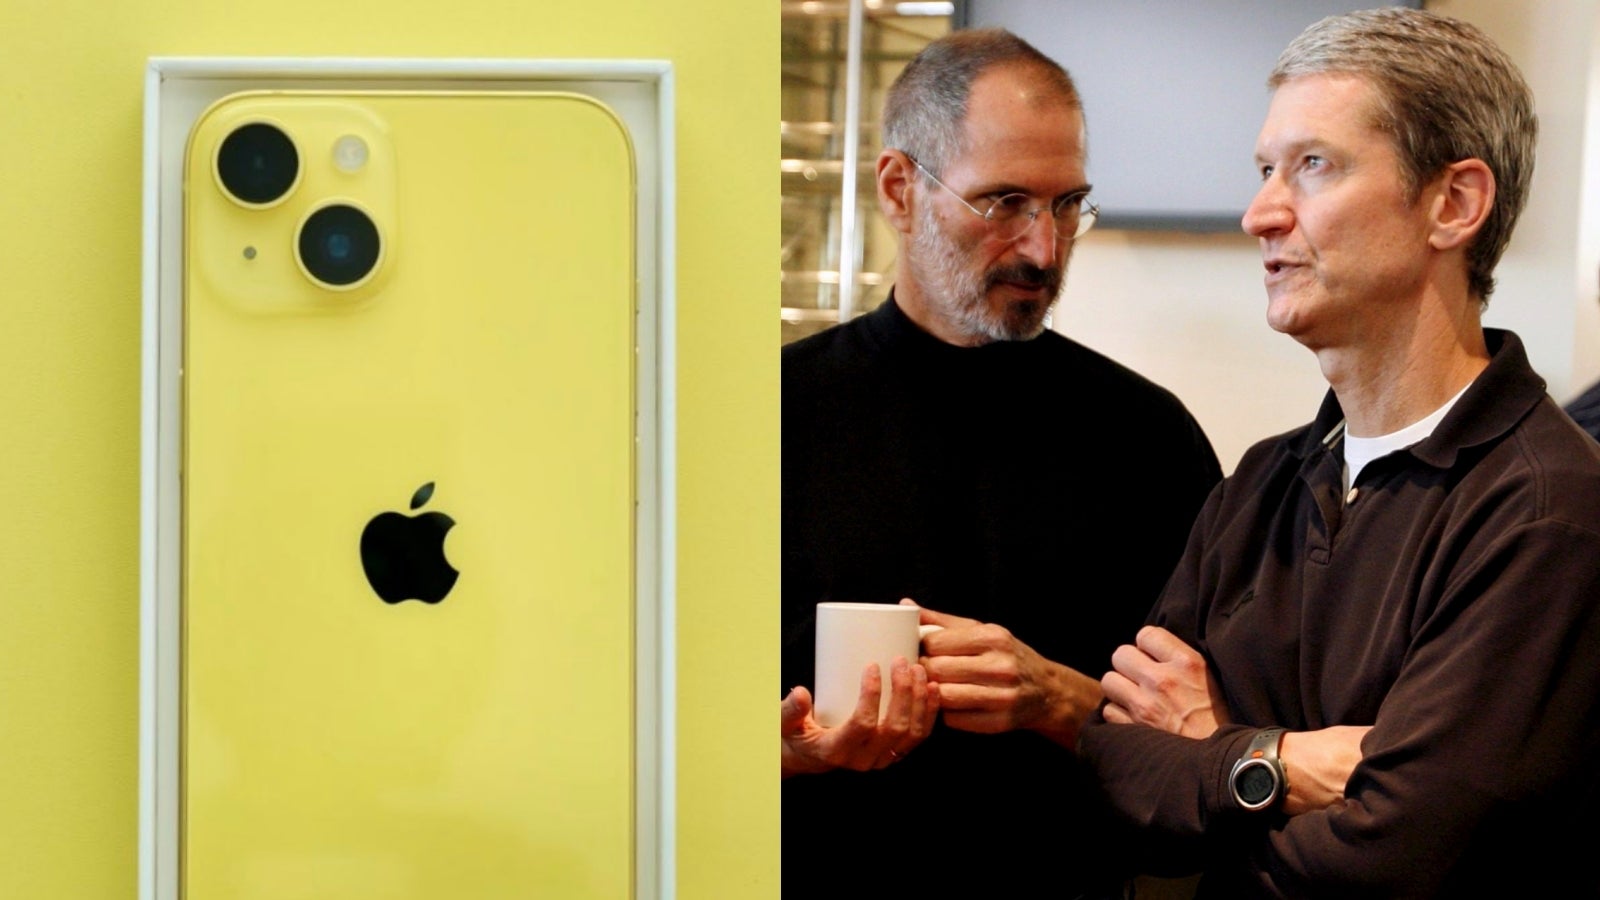 Steve Jobs was a visionary, but Tim Cook took Apple to new (economic) heights.  - 30 million people bought “the worst iPhone ever”: Apple’s cult influence on the telephone market